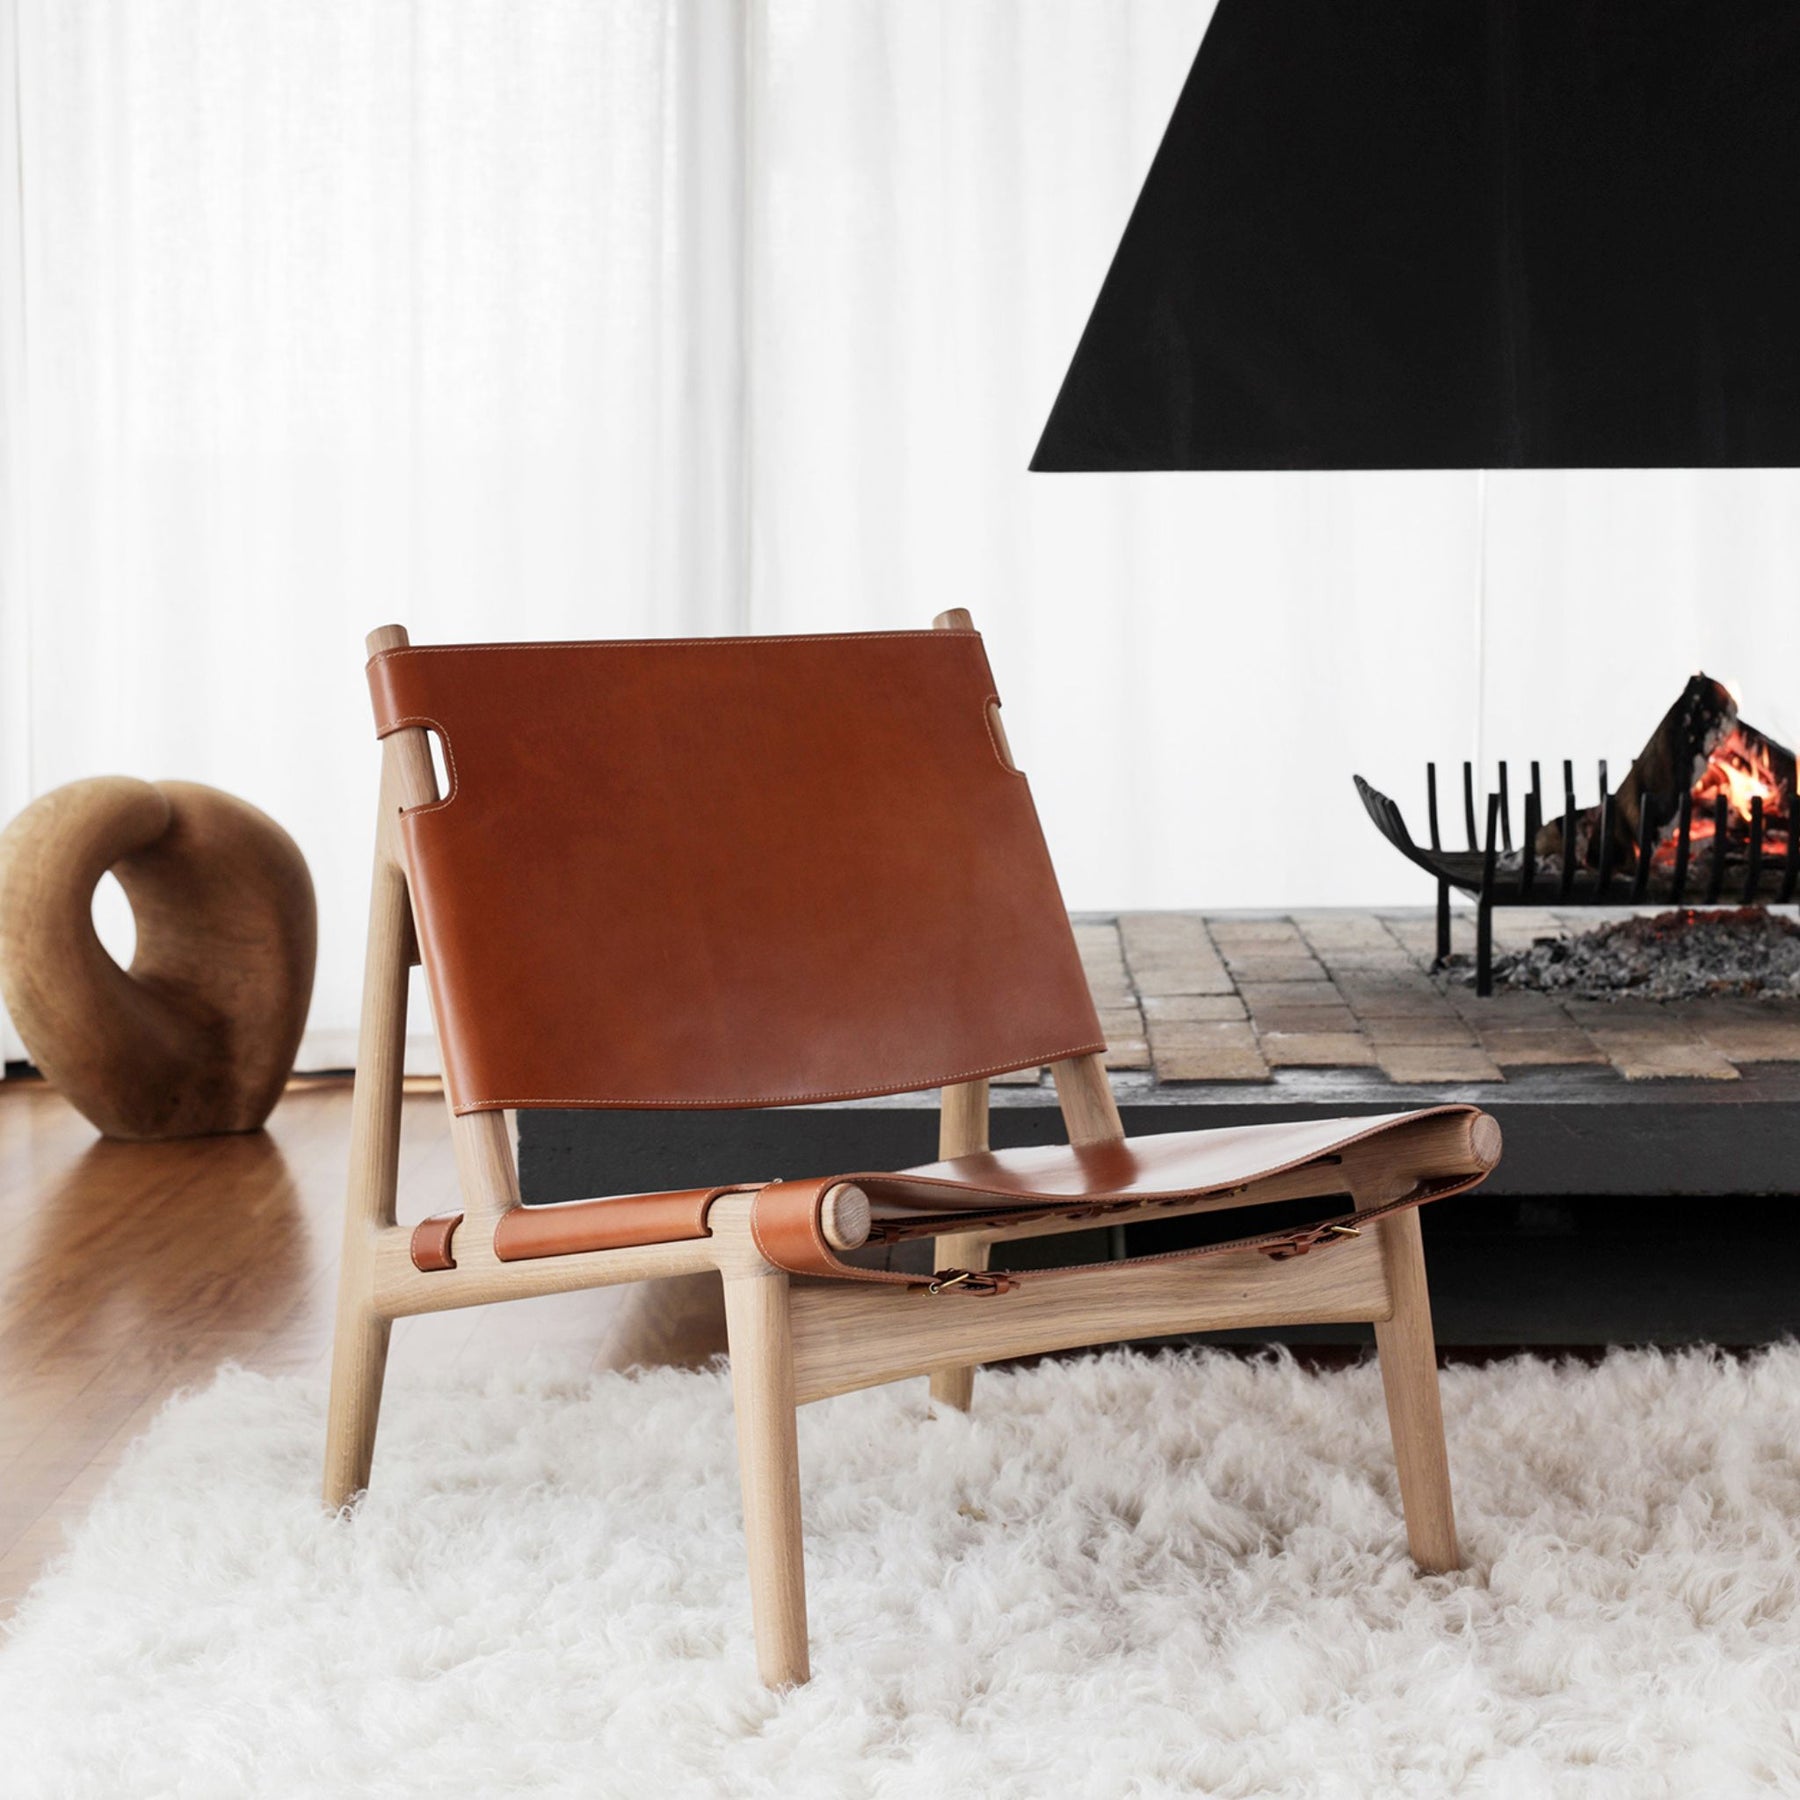 Eikund Hunter Chair Cognac Saddle Leather with Oak Oil Frame on Cozy Shag Rug by Fireplace